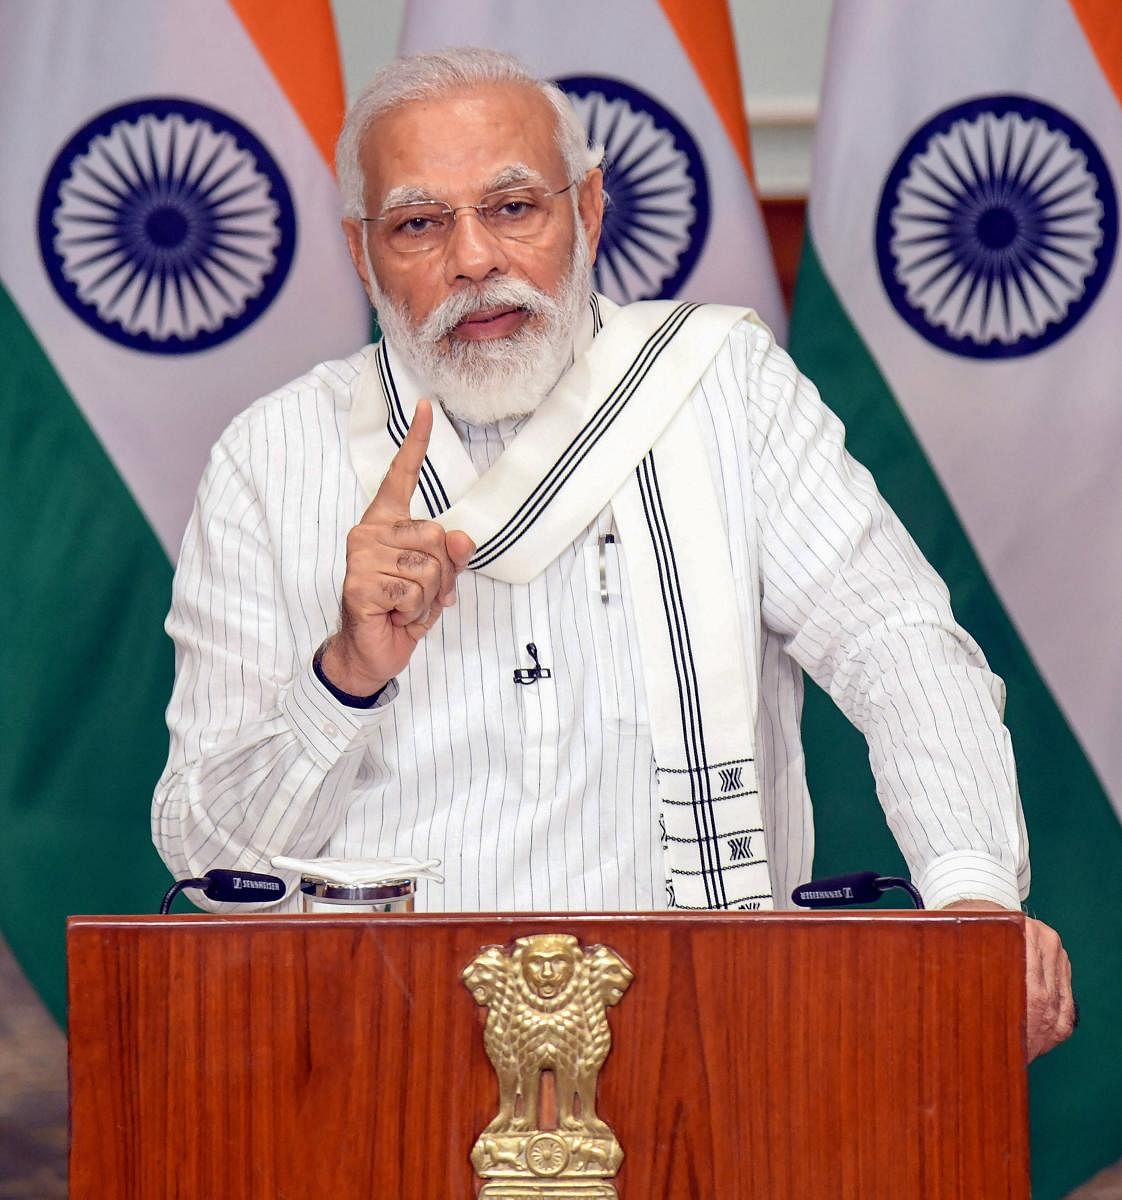 New Delhi: Prime Minister Narendra Modi addresses at the launch of the auction process of Coal blocks for Commercial mining through video conference, in New Delhi, Thursday, June 18, 2020. (PIB/PTI Photo)(PTI18-06-2020_000259B)